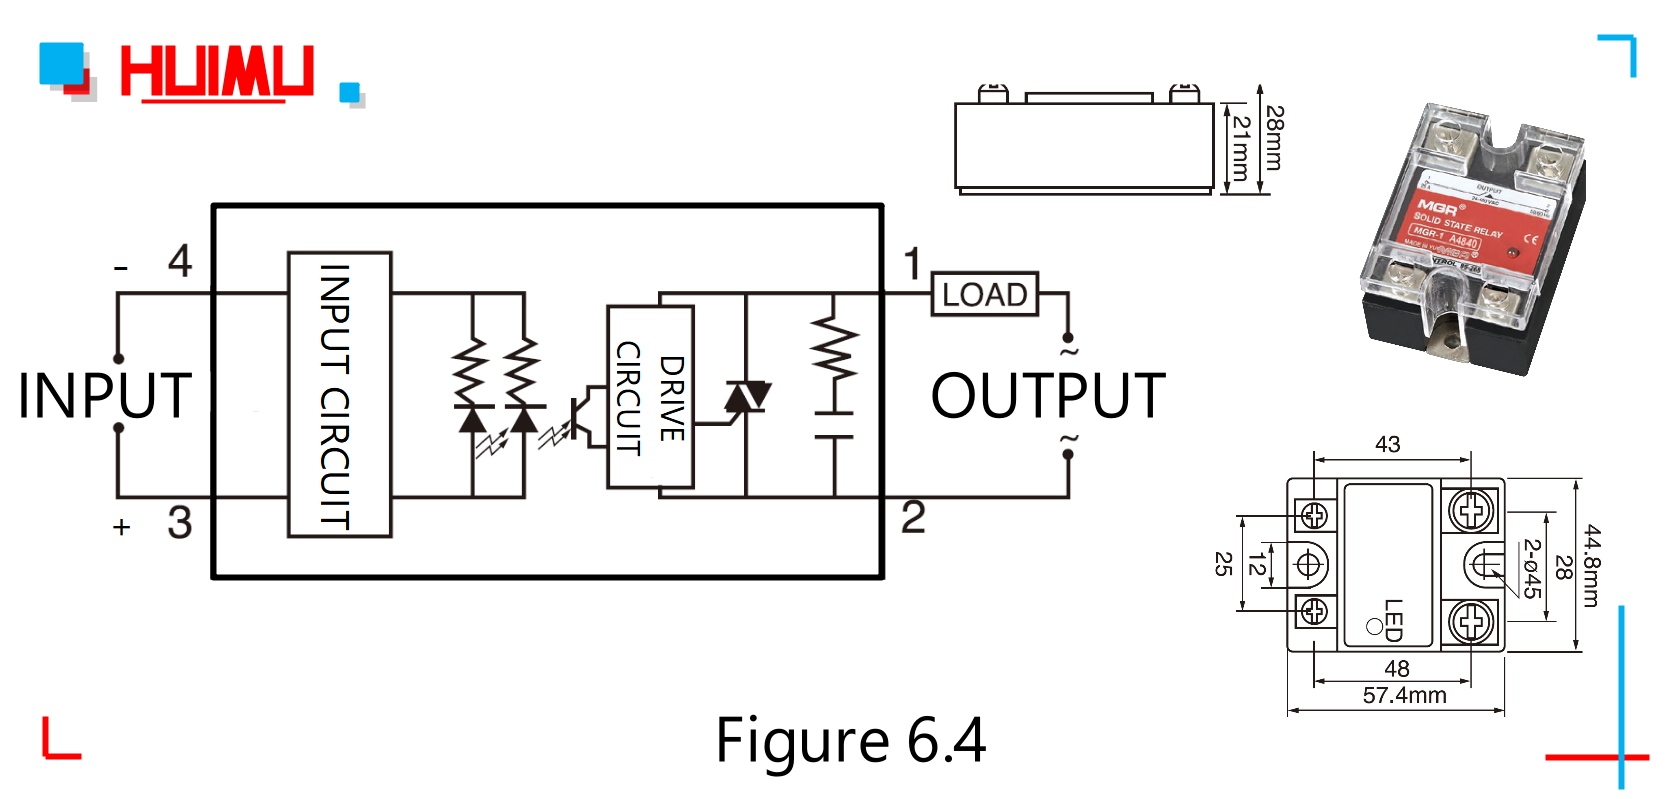 Circuit diagram, dimensions, and drawing of the zero-crossing AC solid state relays